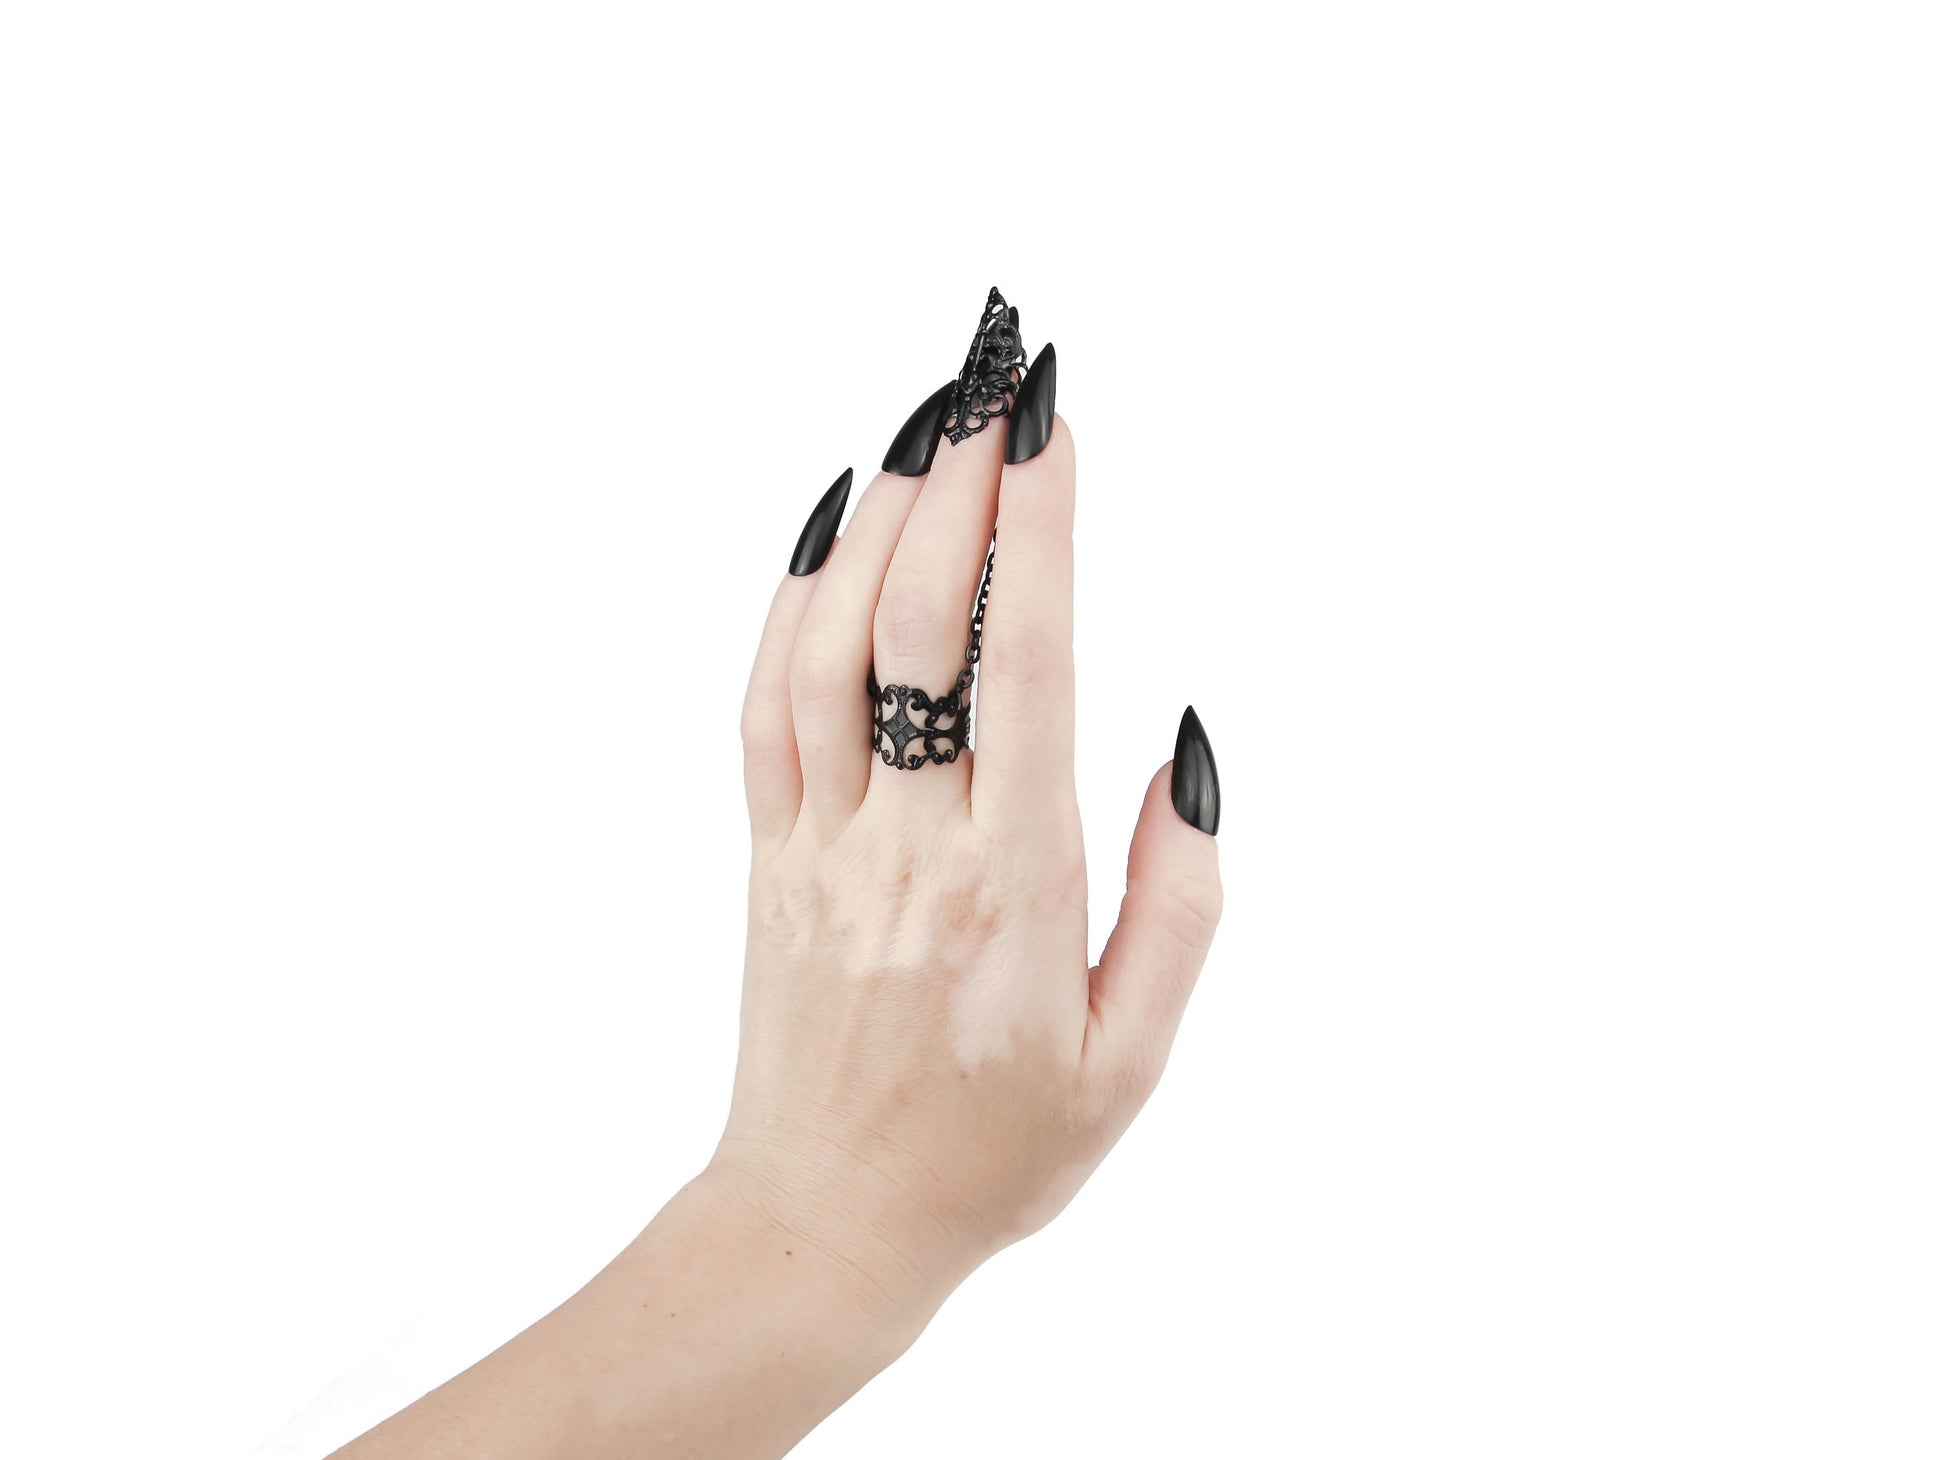 An avant-garde ring with claw from Myril Jewels, featuring intricate gothic-inspired filigree design that exudes dark elegance. The black chain connects a detailed ring to a matching claw over the nail, embodying the brand's commitment to sophisticated, futuristic gothic style. Ideal for those who appreciate gothic-chic, Neo Gothic, and Witchcore aesthetics, this piece is perfect for everyday wear, Halloween, or as a statement accessory for rave parties and festivals.